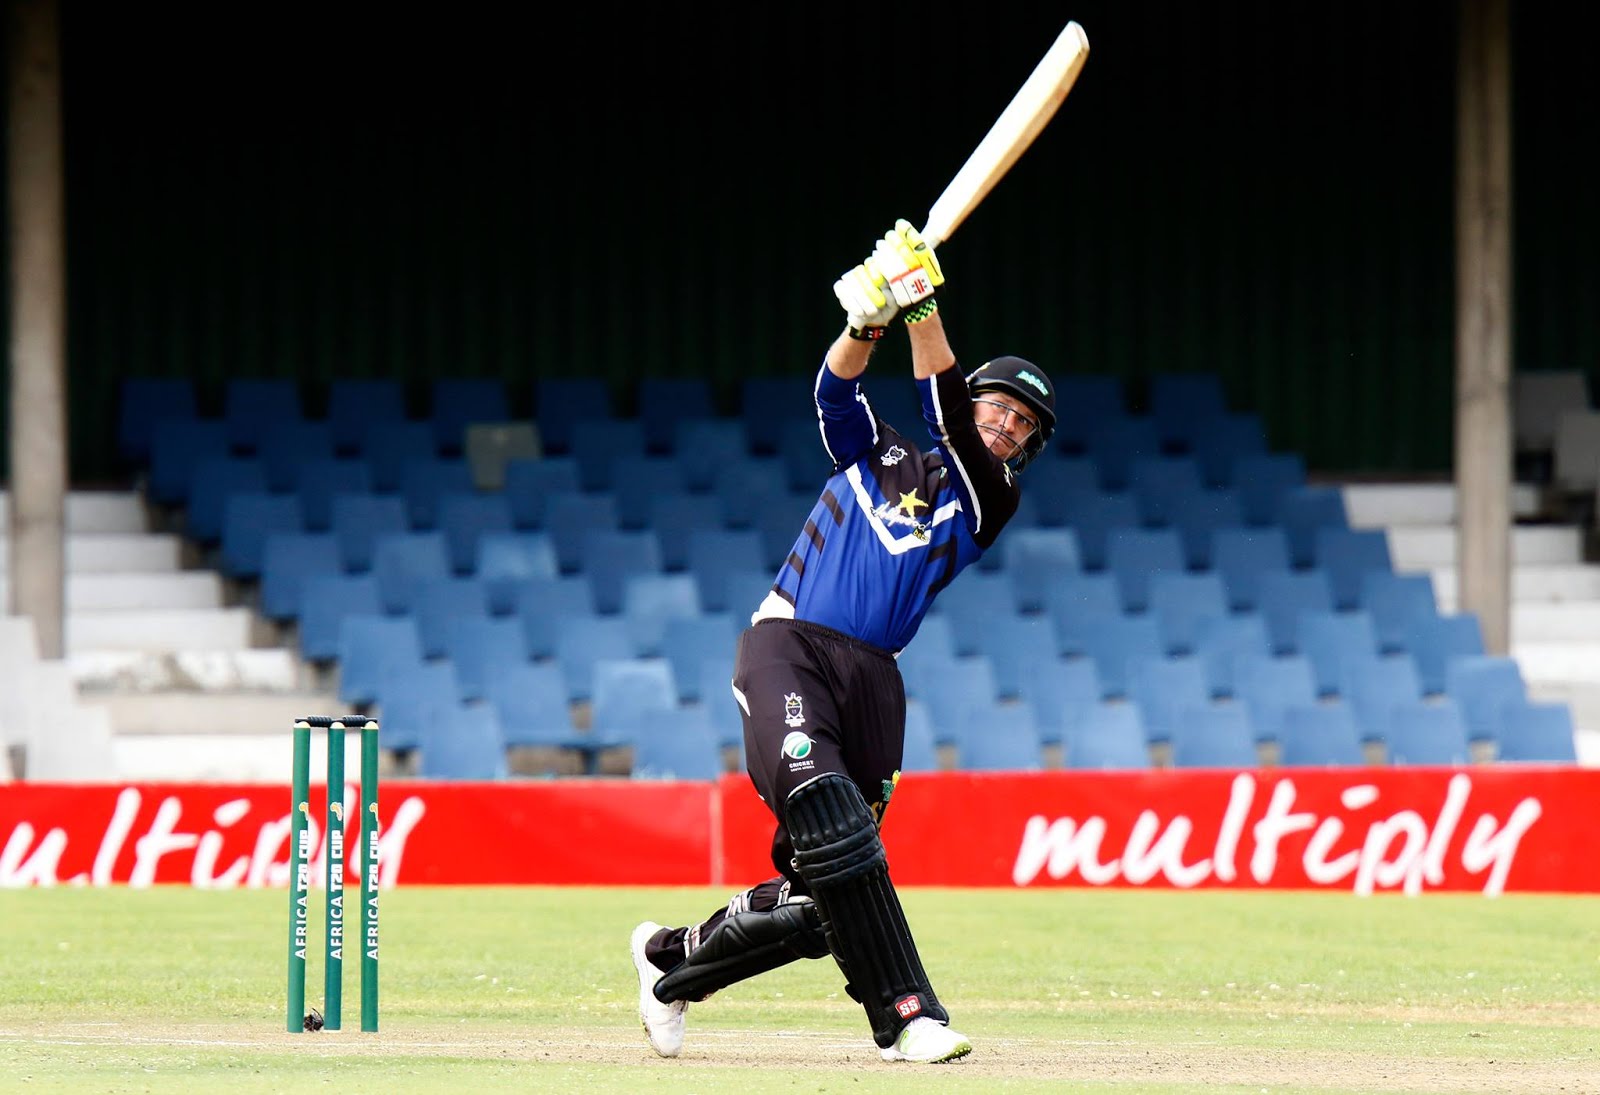 Sarel Erwee - Africa T20 Cup - KZN Inland - Hollywoodbets - Cricket - Hitting the ball over mid-wicket